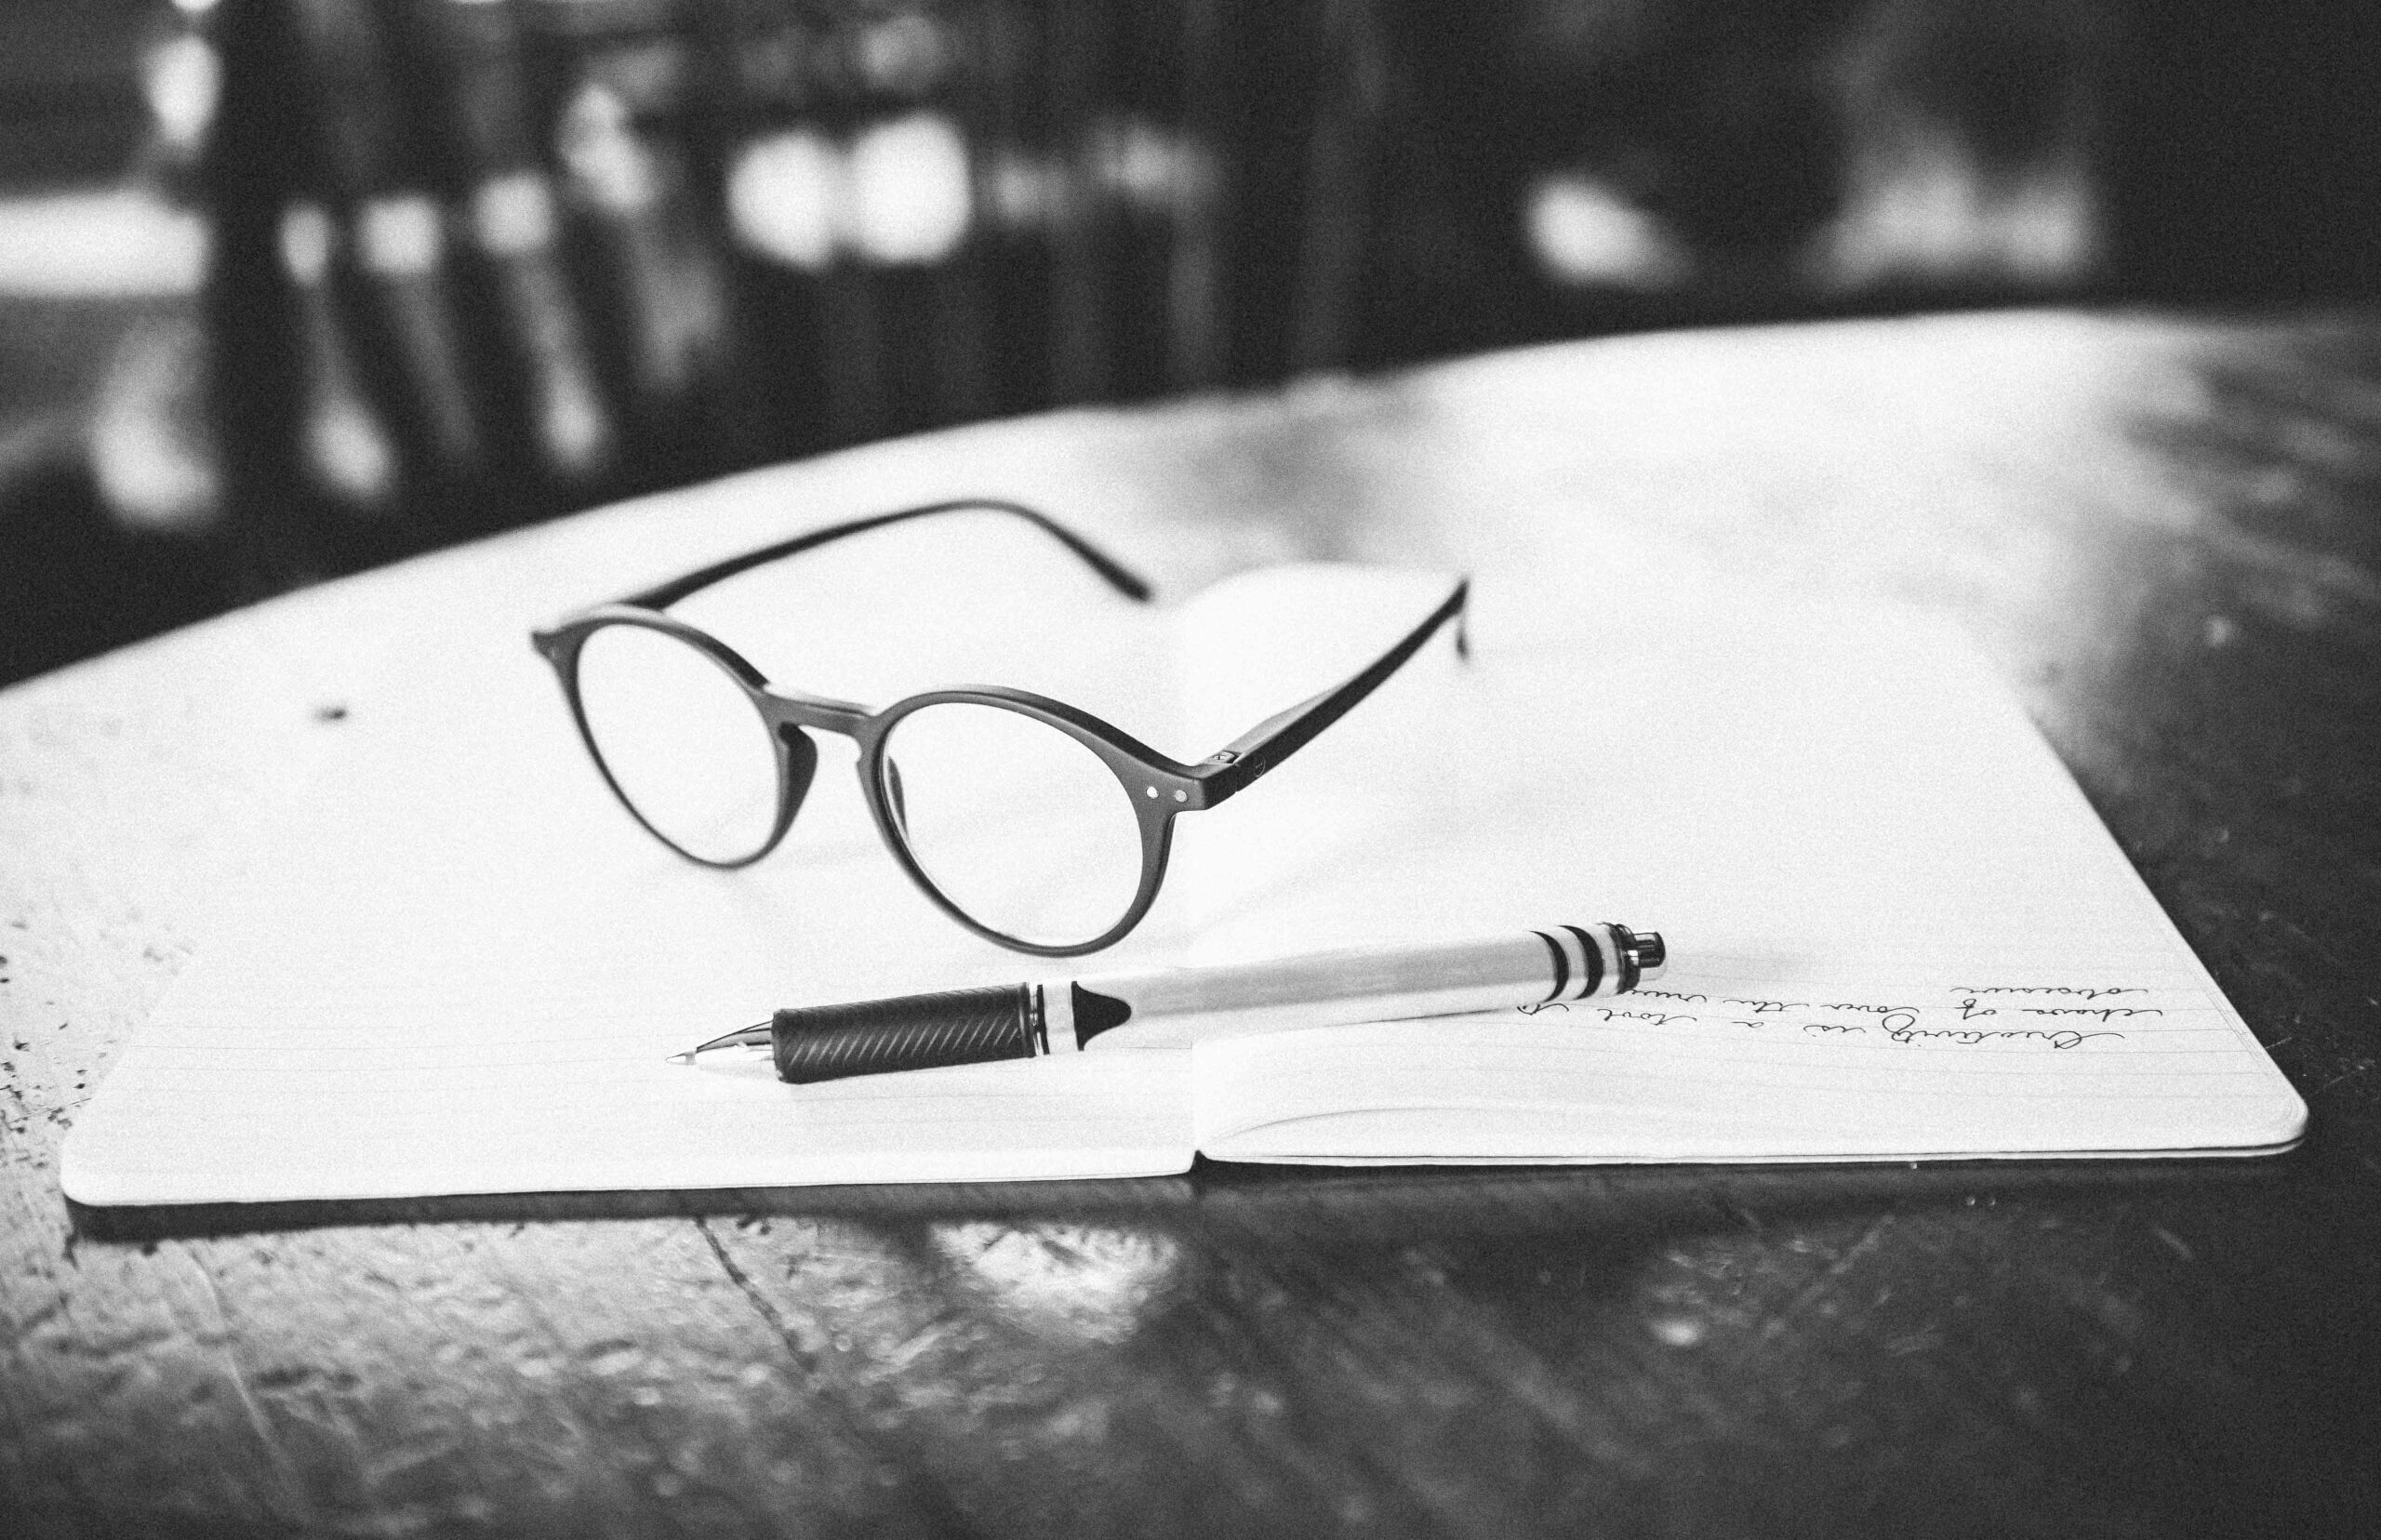 Black and white image of reading glasses and a pen lying on an open journal.